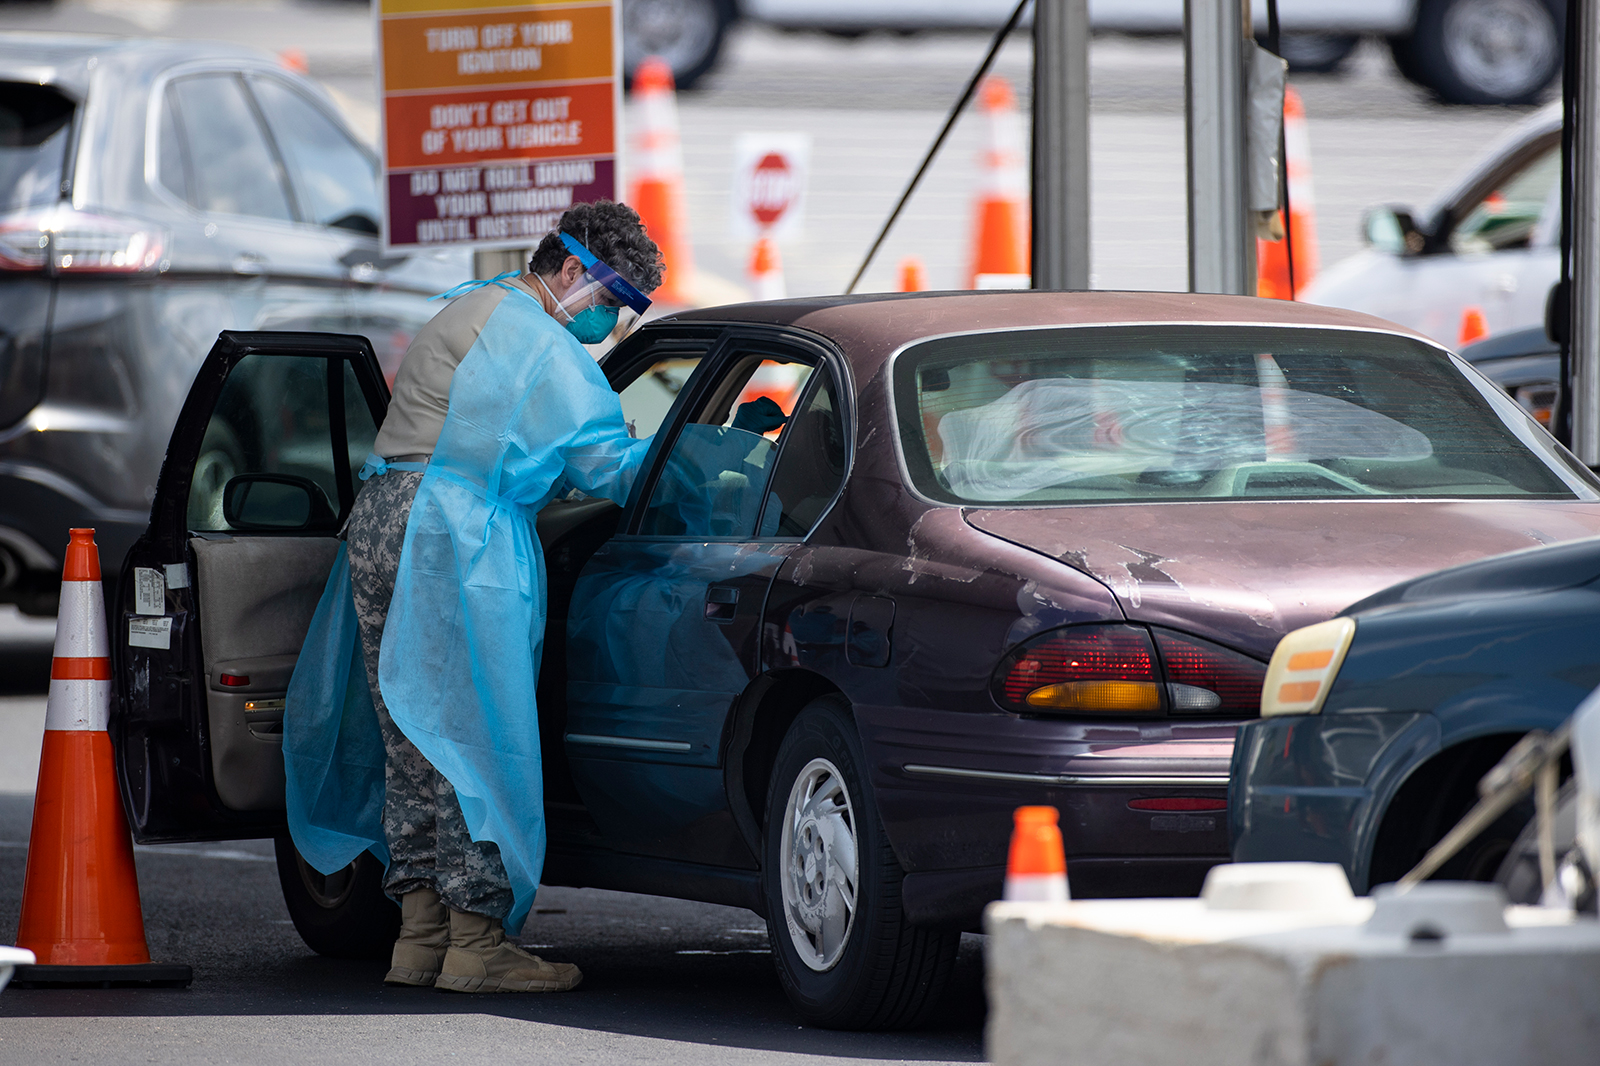 Healthcare workers test people in their car at a Covid-19 testing center outside Nissan Stadium on August 3, in Nashville.